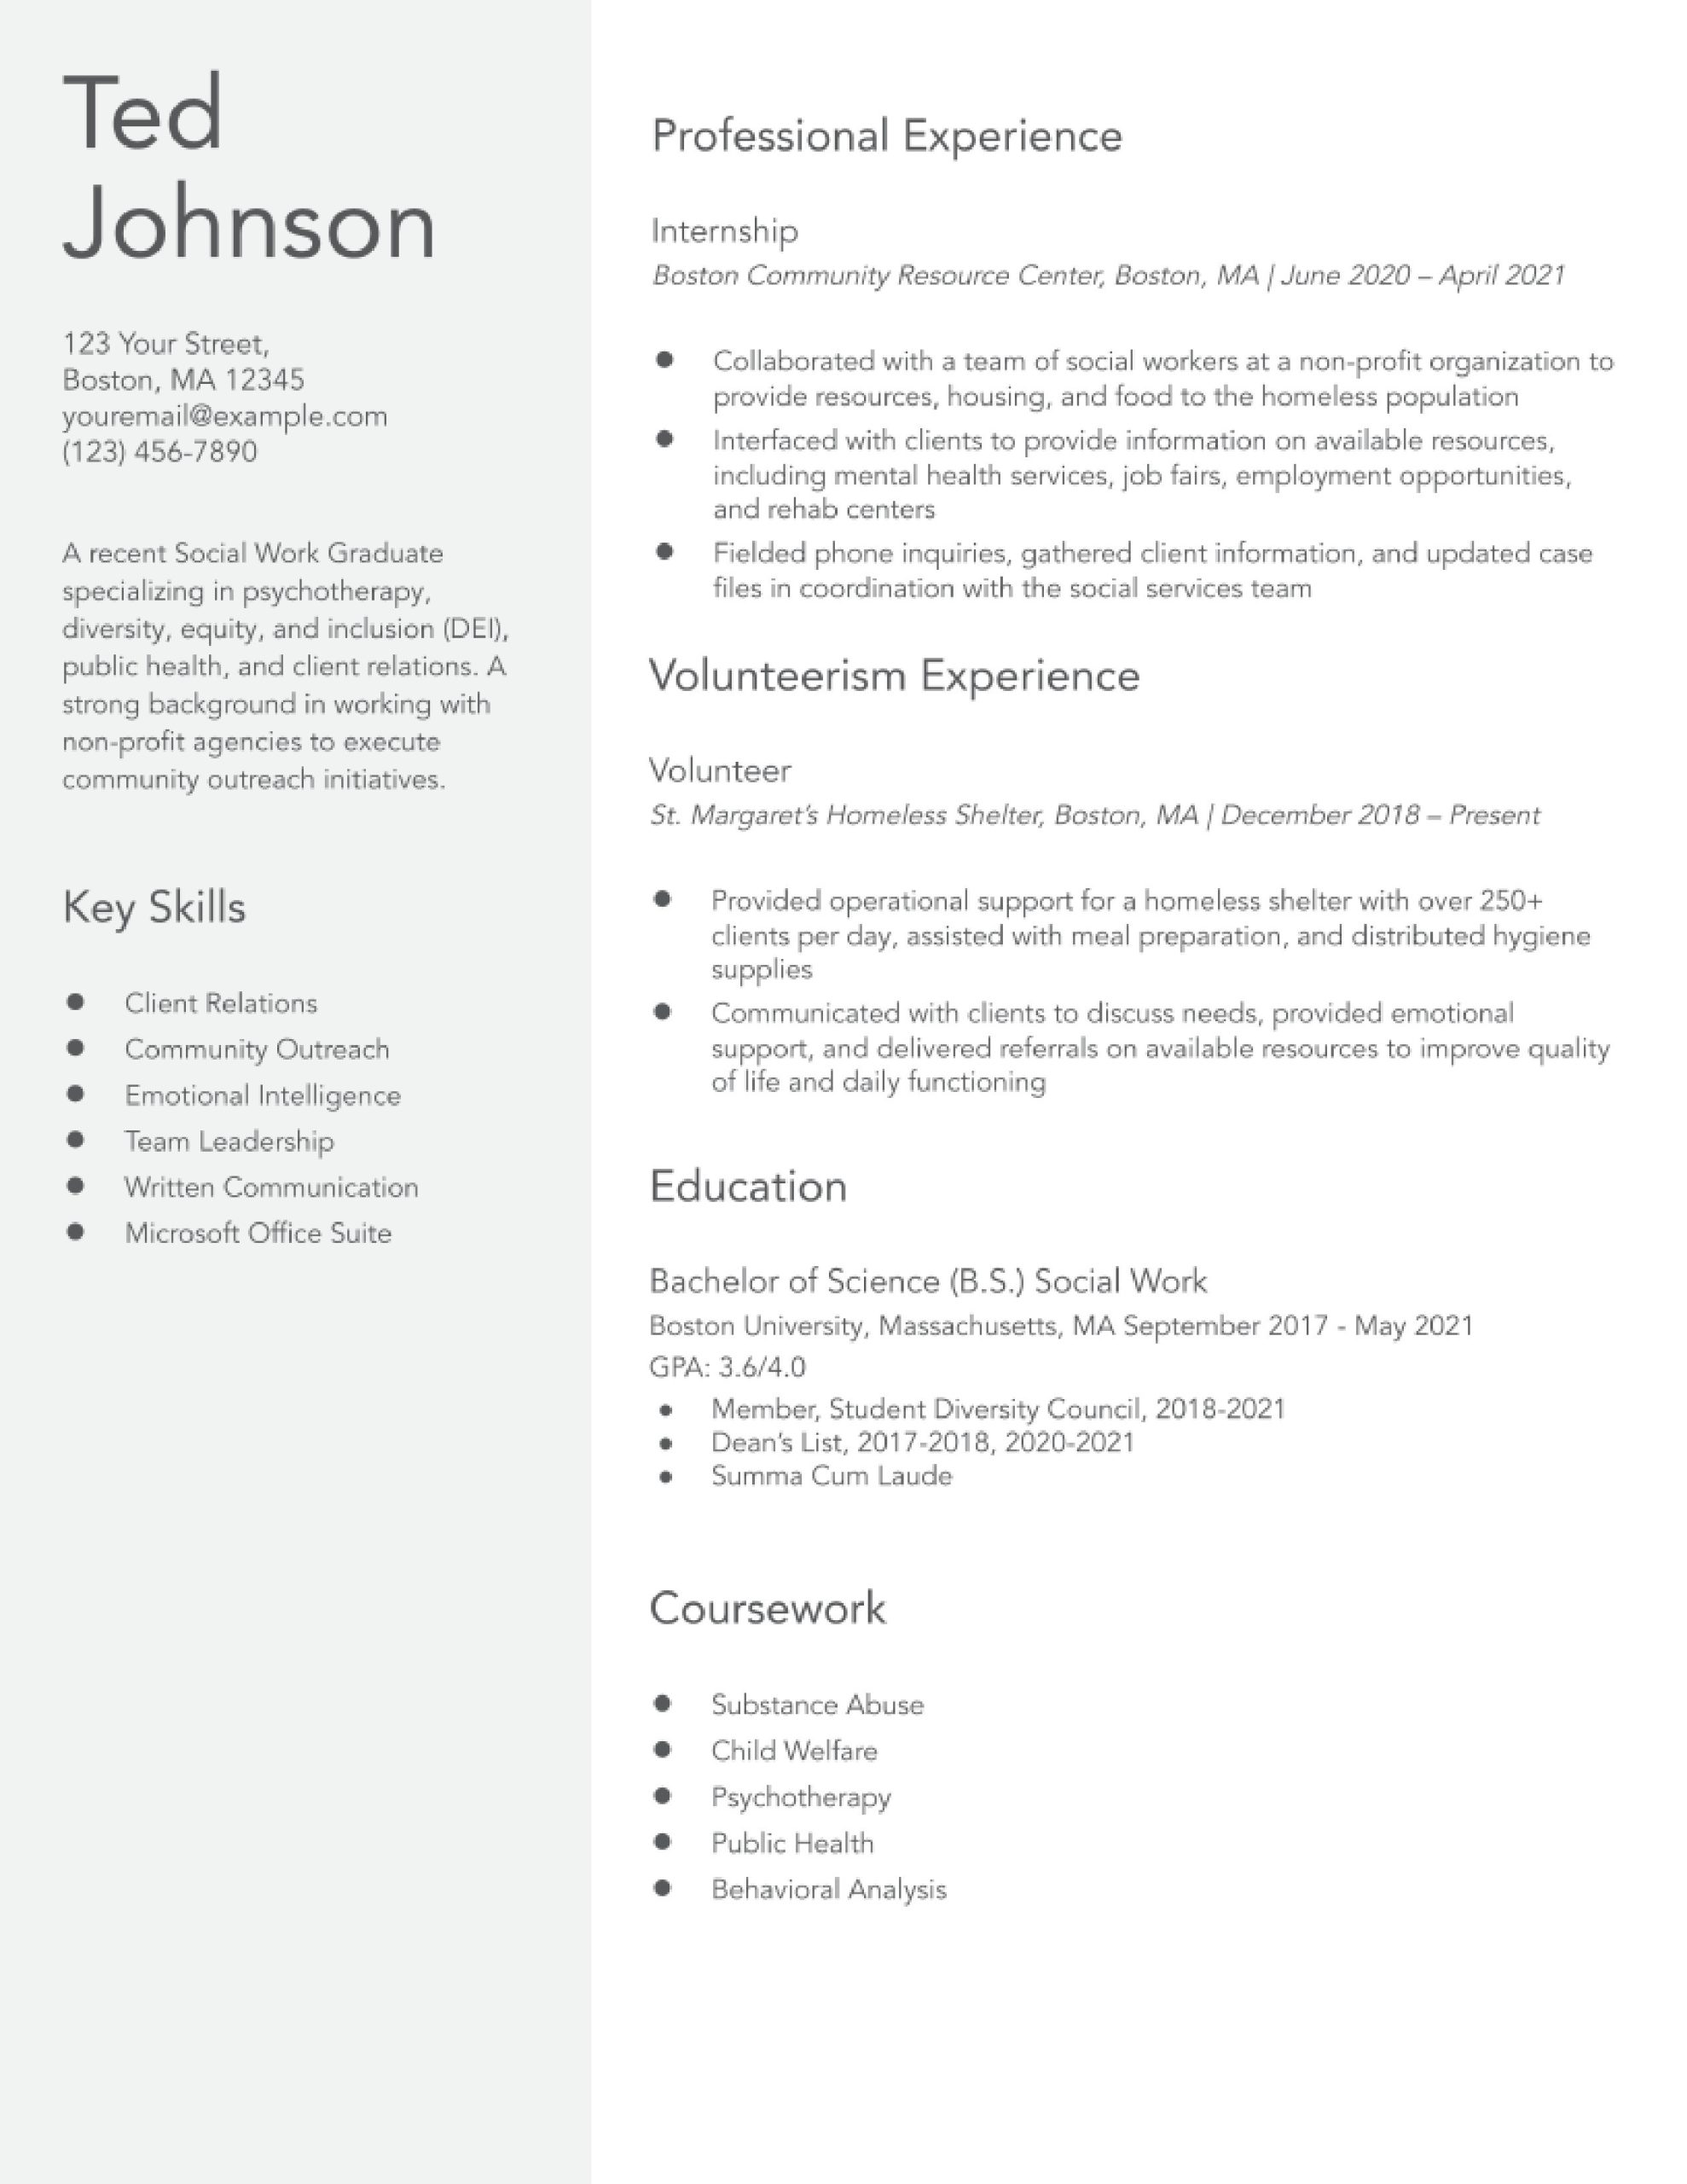 Sample Resume with Bachelors and Masters Degrees Graduate School Resume Examples In 2022 – Resumebuilder.com